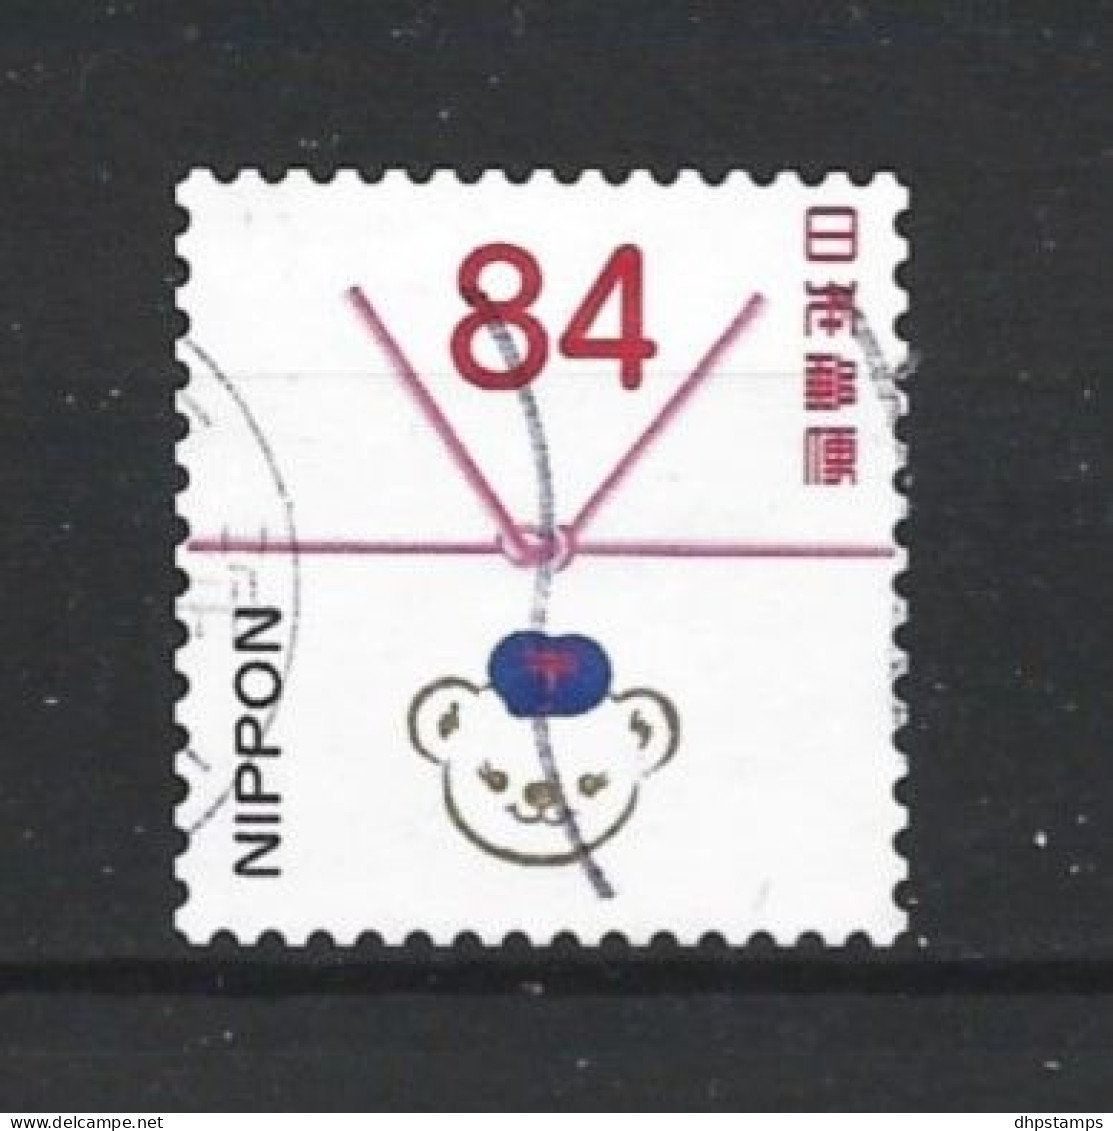 Japan 2020 Poskuma Y.T. 10083 (0) - Used Stamps